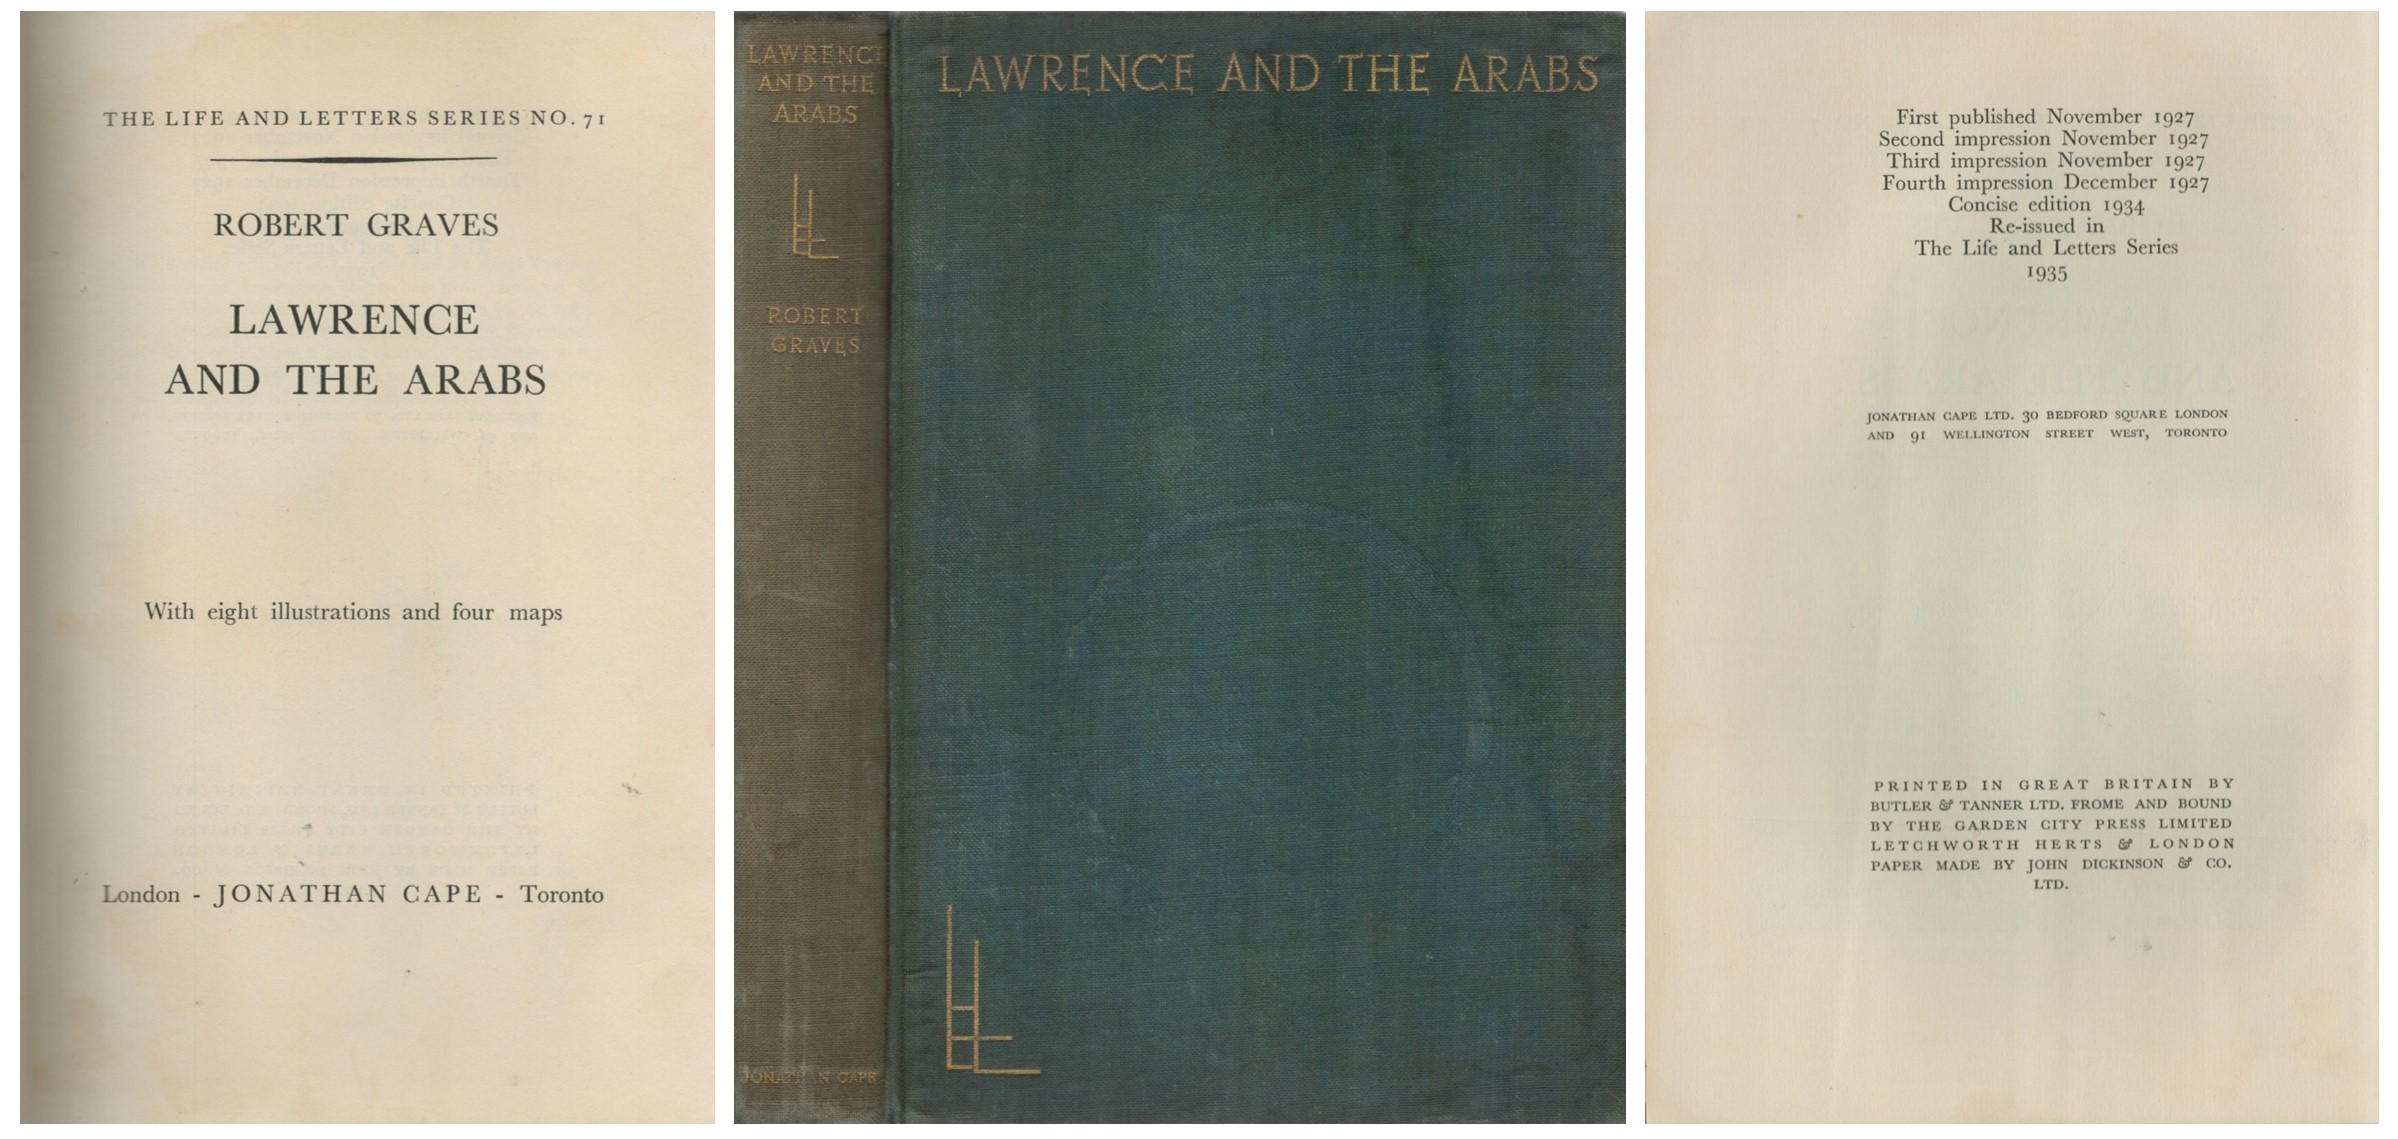 Lawrence And The Arabs. The Life & Letters Series 1935, Volume 7 I. Hardback book. Robert Graves. - Image 5 of 6